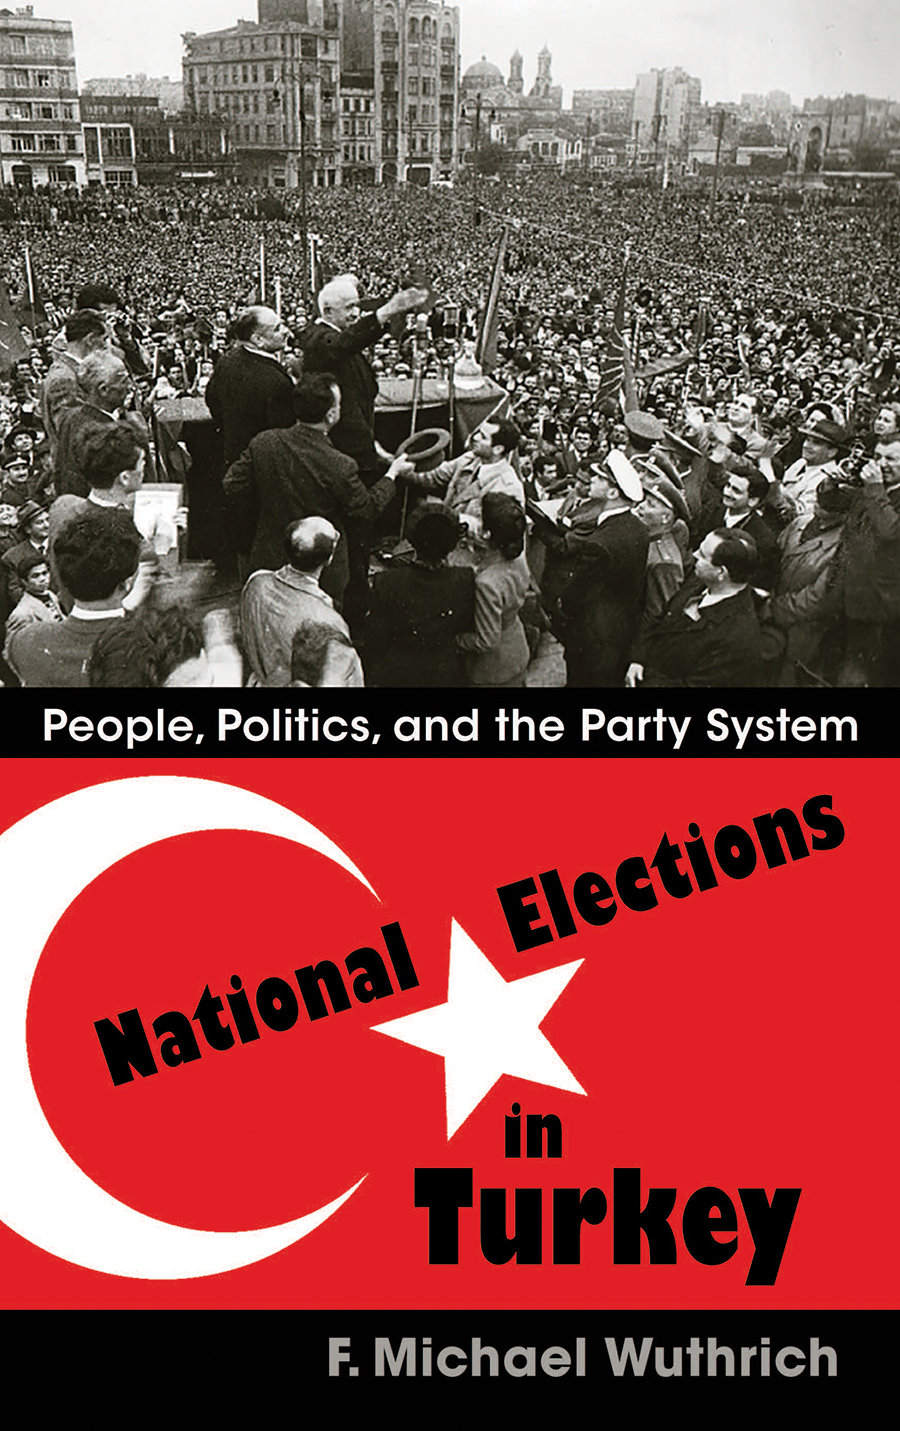 Michael Wuthrich on the history of elections in Turkey and the future of Turkish democracy